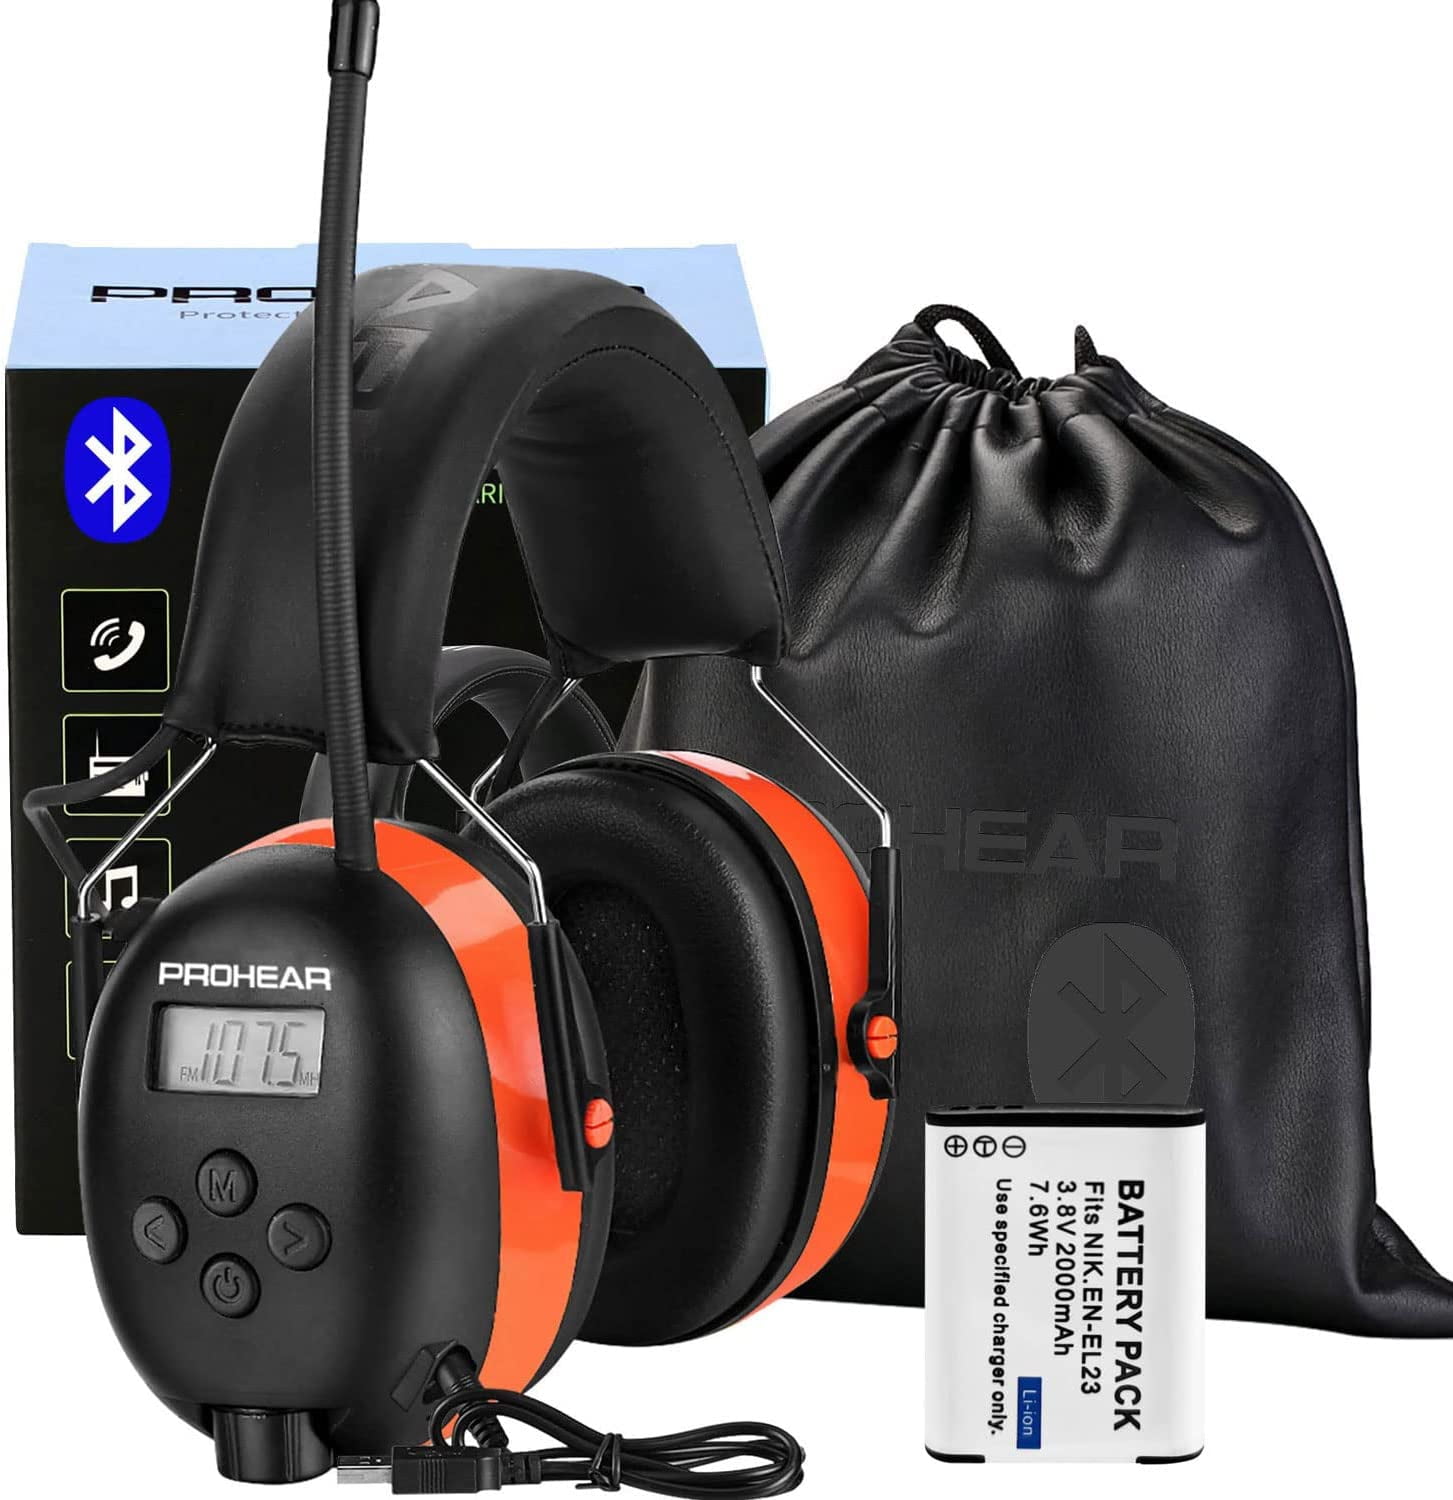 PROHEAR 033 Bluetooth Hearing Protection Headphones with FM AM Radio for  Mowing, 25dB NRR, Orange